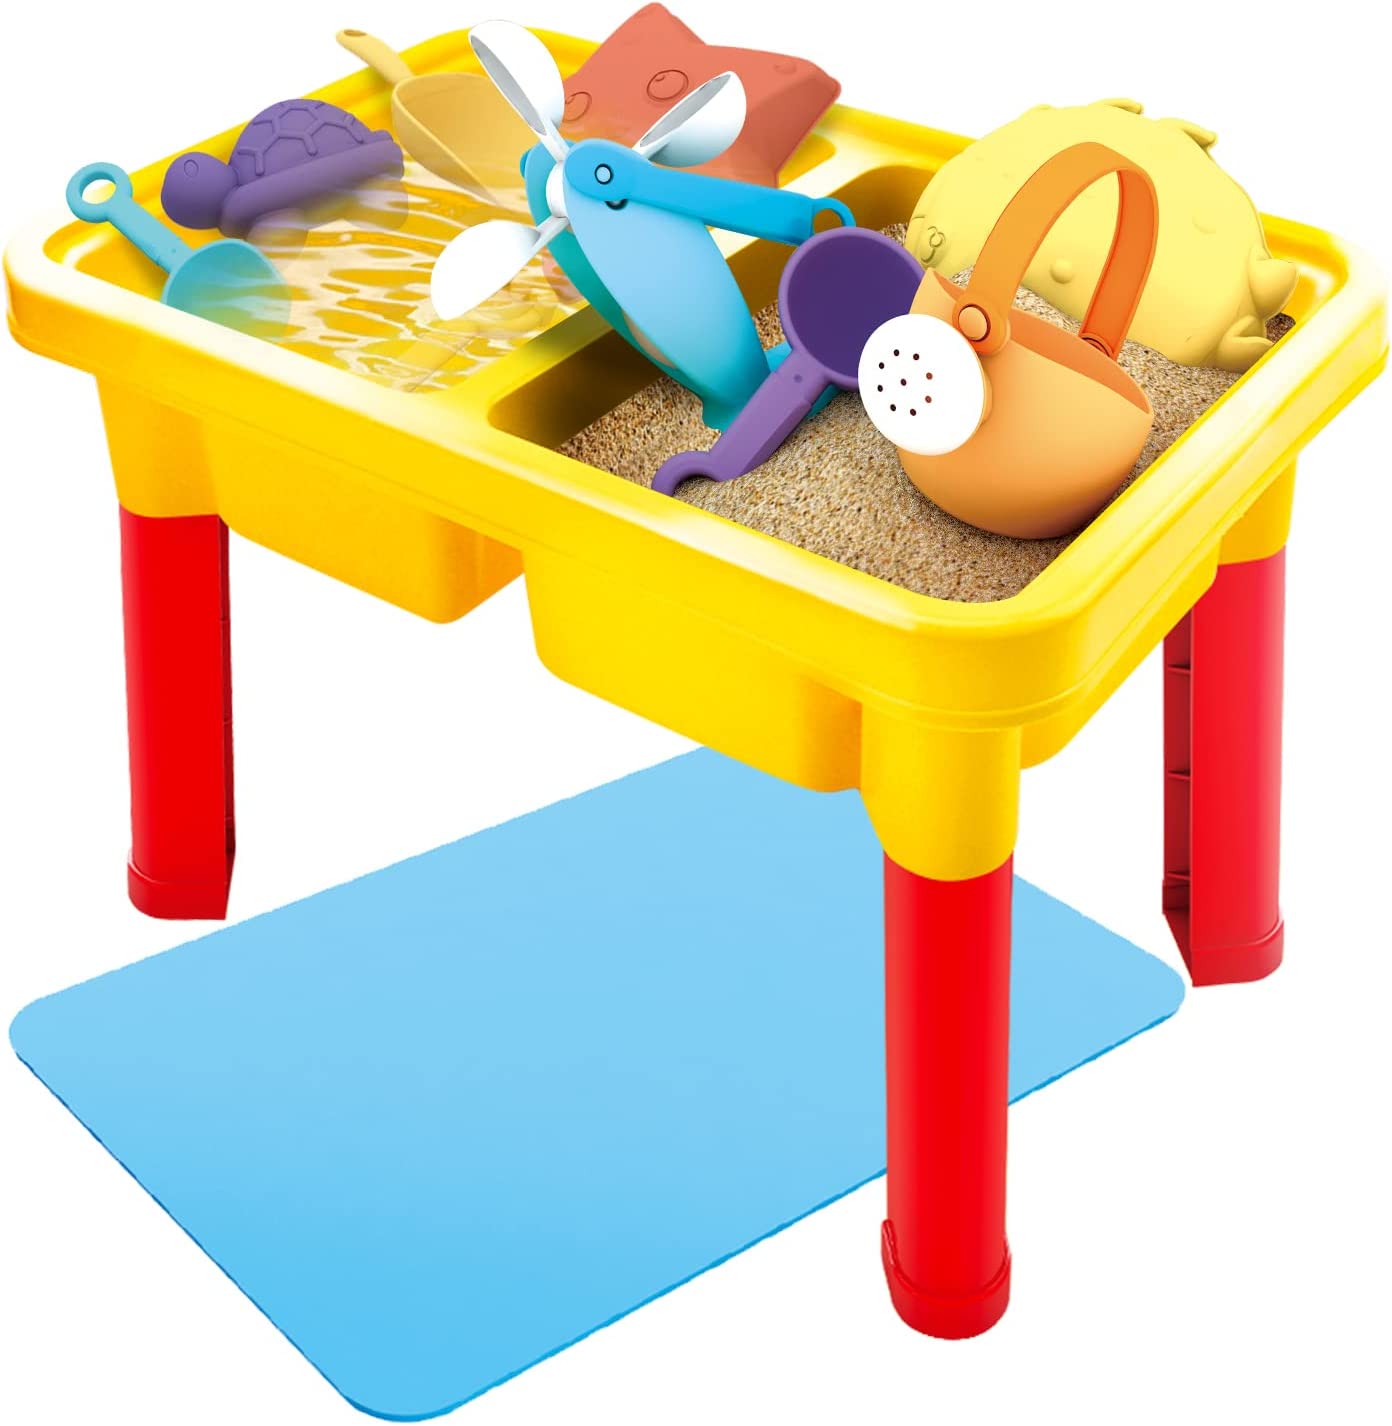 SOWOW Compact Covered Sand & Water Table For Toddlers